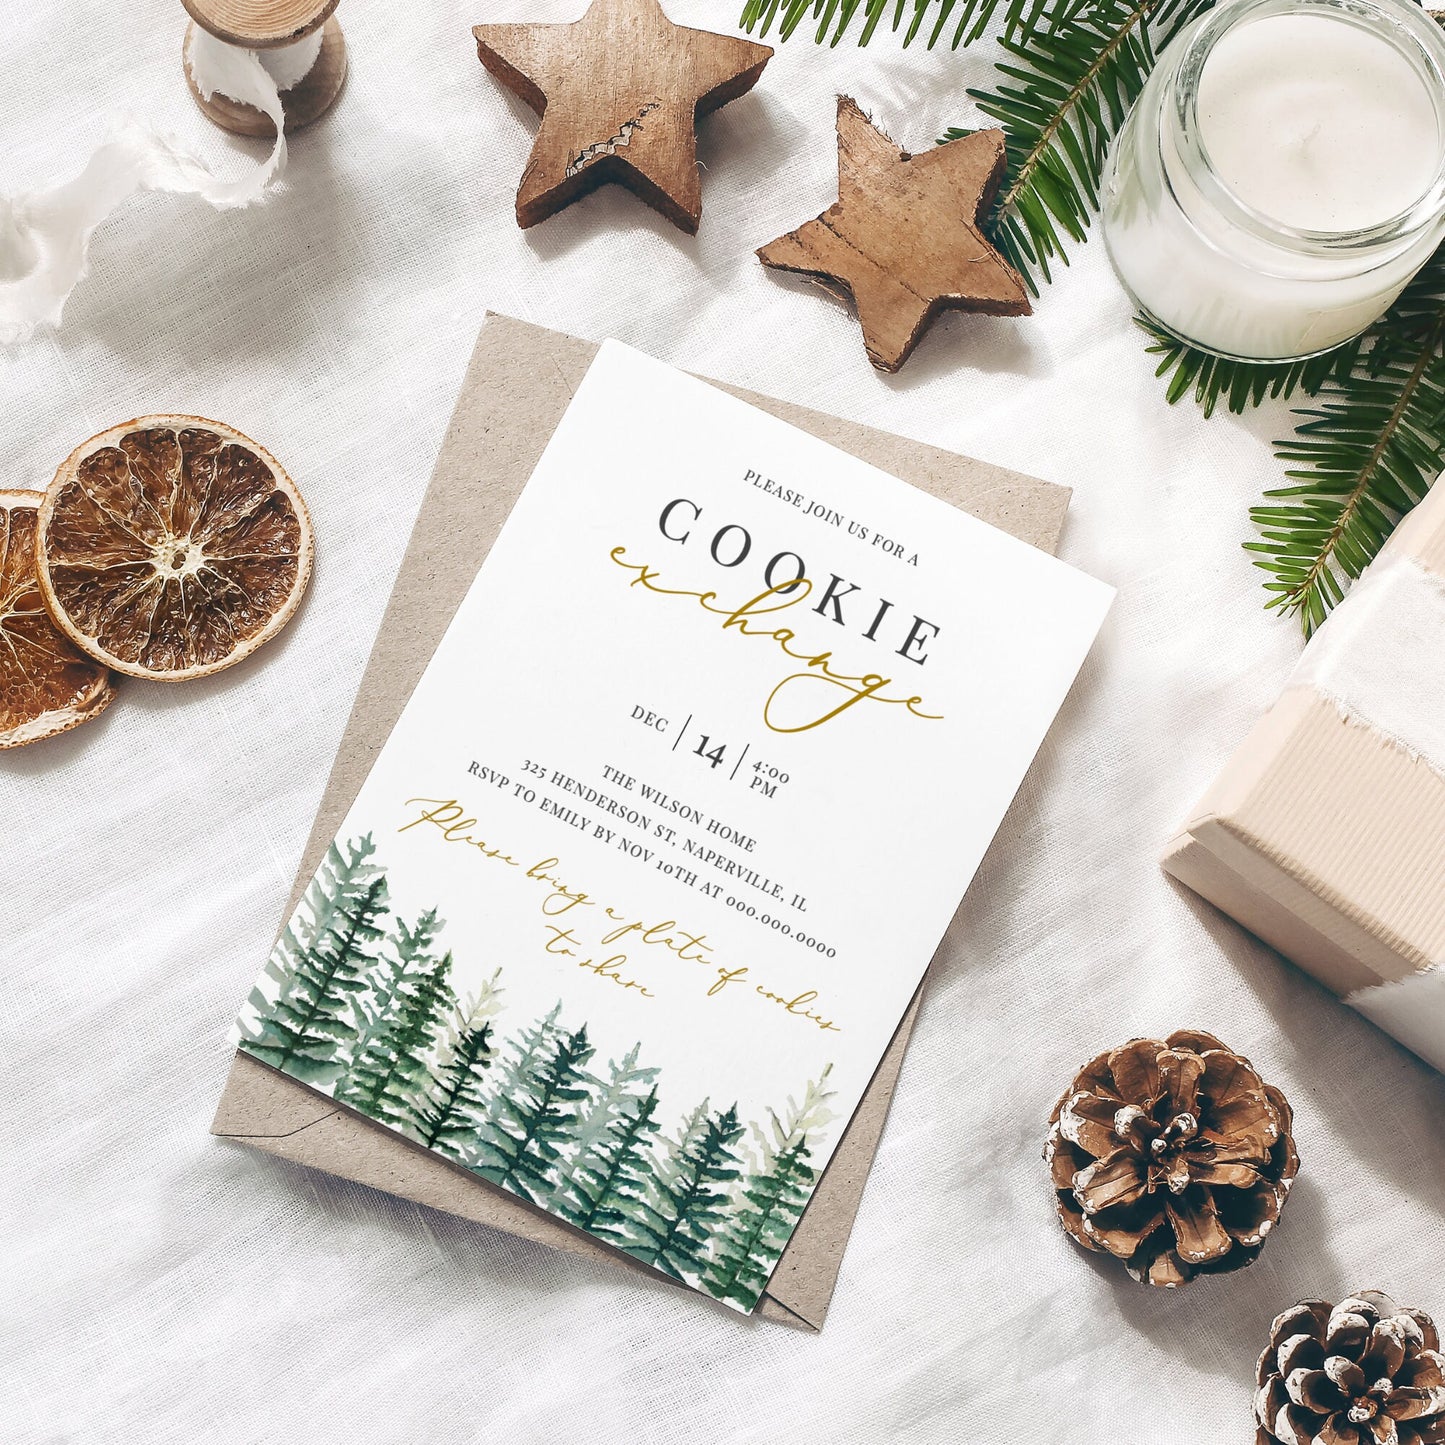 Editable Christmas Cookie Exchange Invitation Winter Woodland Holiday Cookie Party Invite Template